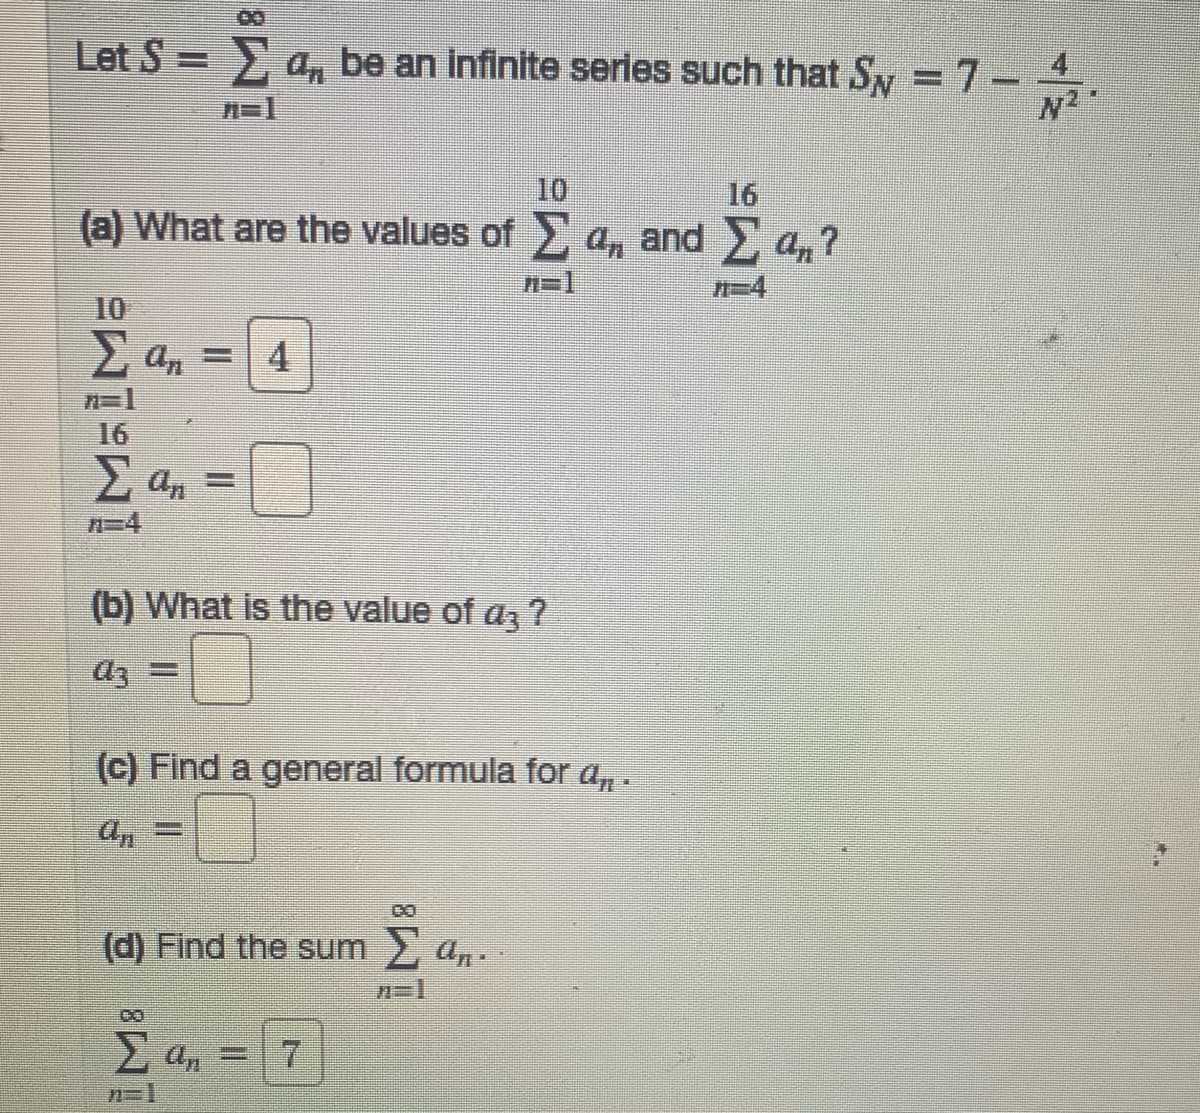 Let S =
> a, be an infinite series such that Sy = 7-
N2
n=1
10
(a) What are the values of a, and , a,?
16
n=1
10
2 an = 4
16
2 an =
n=4
(b) What is the value of az ?
(c) Find a general formula for a,.
an
%3D
(d) Find the sum 2 an.
E a, = 7
